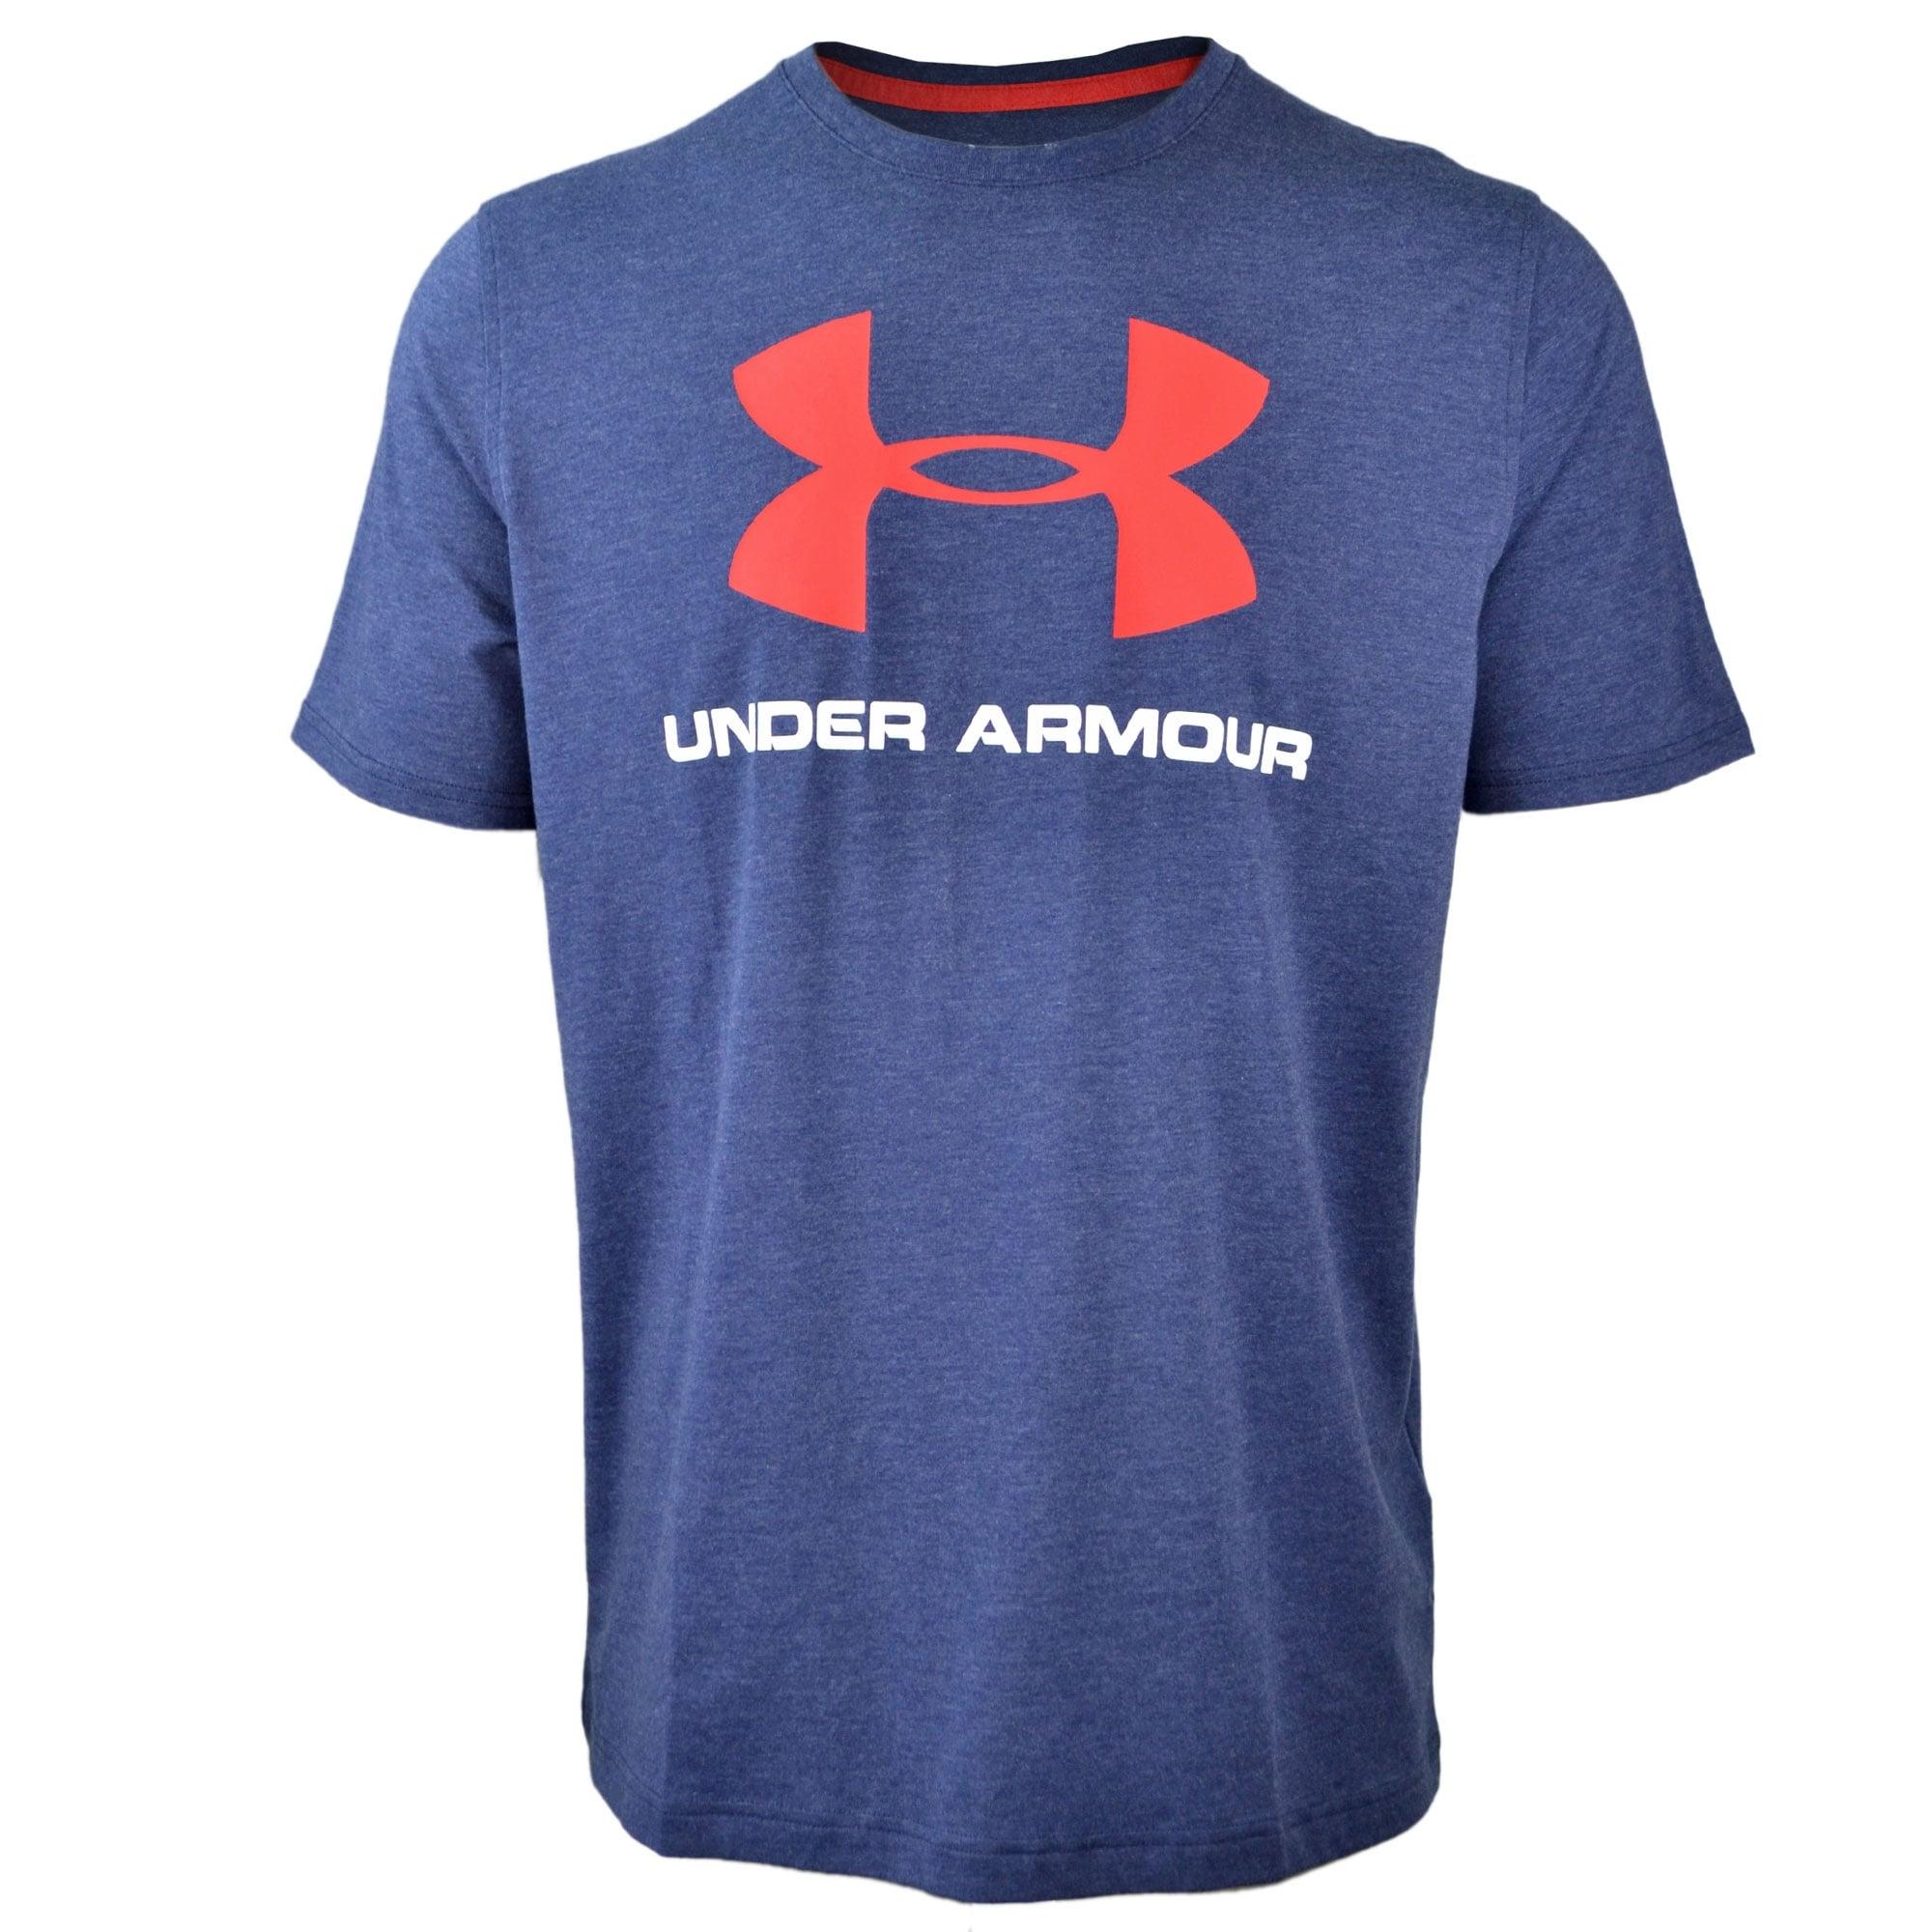 Red and Blue Under Armour Logo - Sportstyle logo t-shirt - Blue